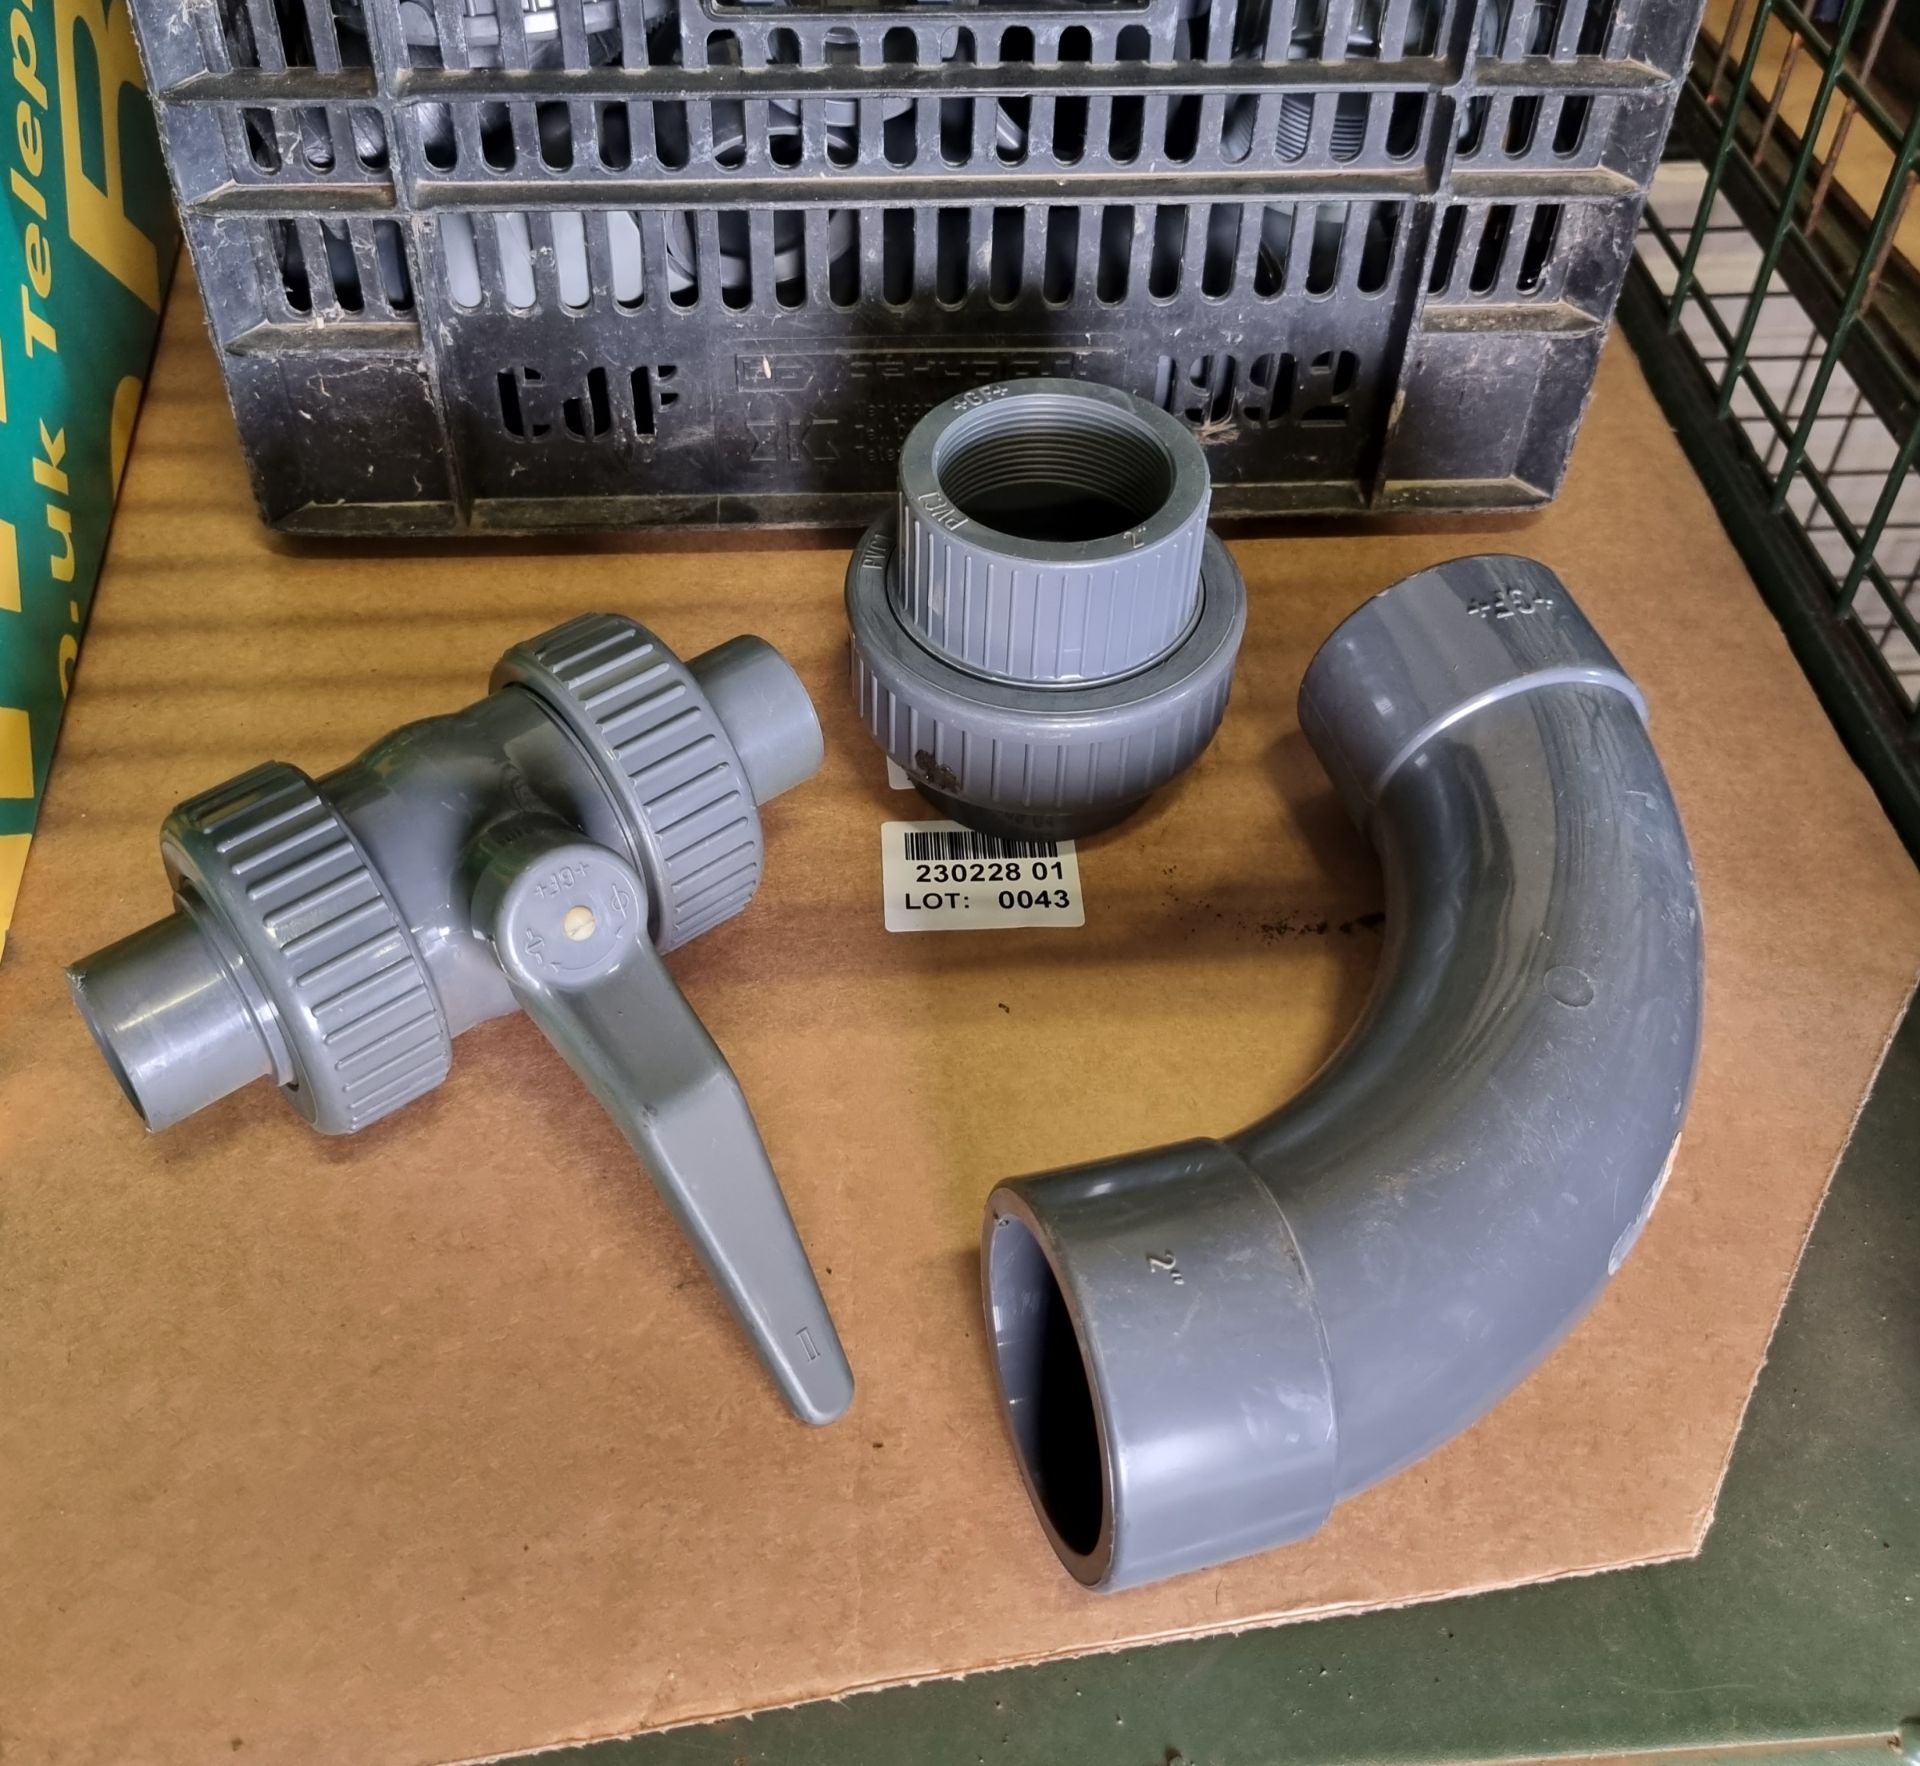 GF 2 inch PVS water pipe fittings of various angles and types - Image 3 of 3